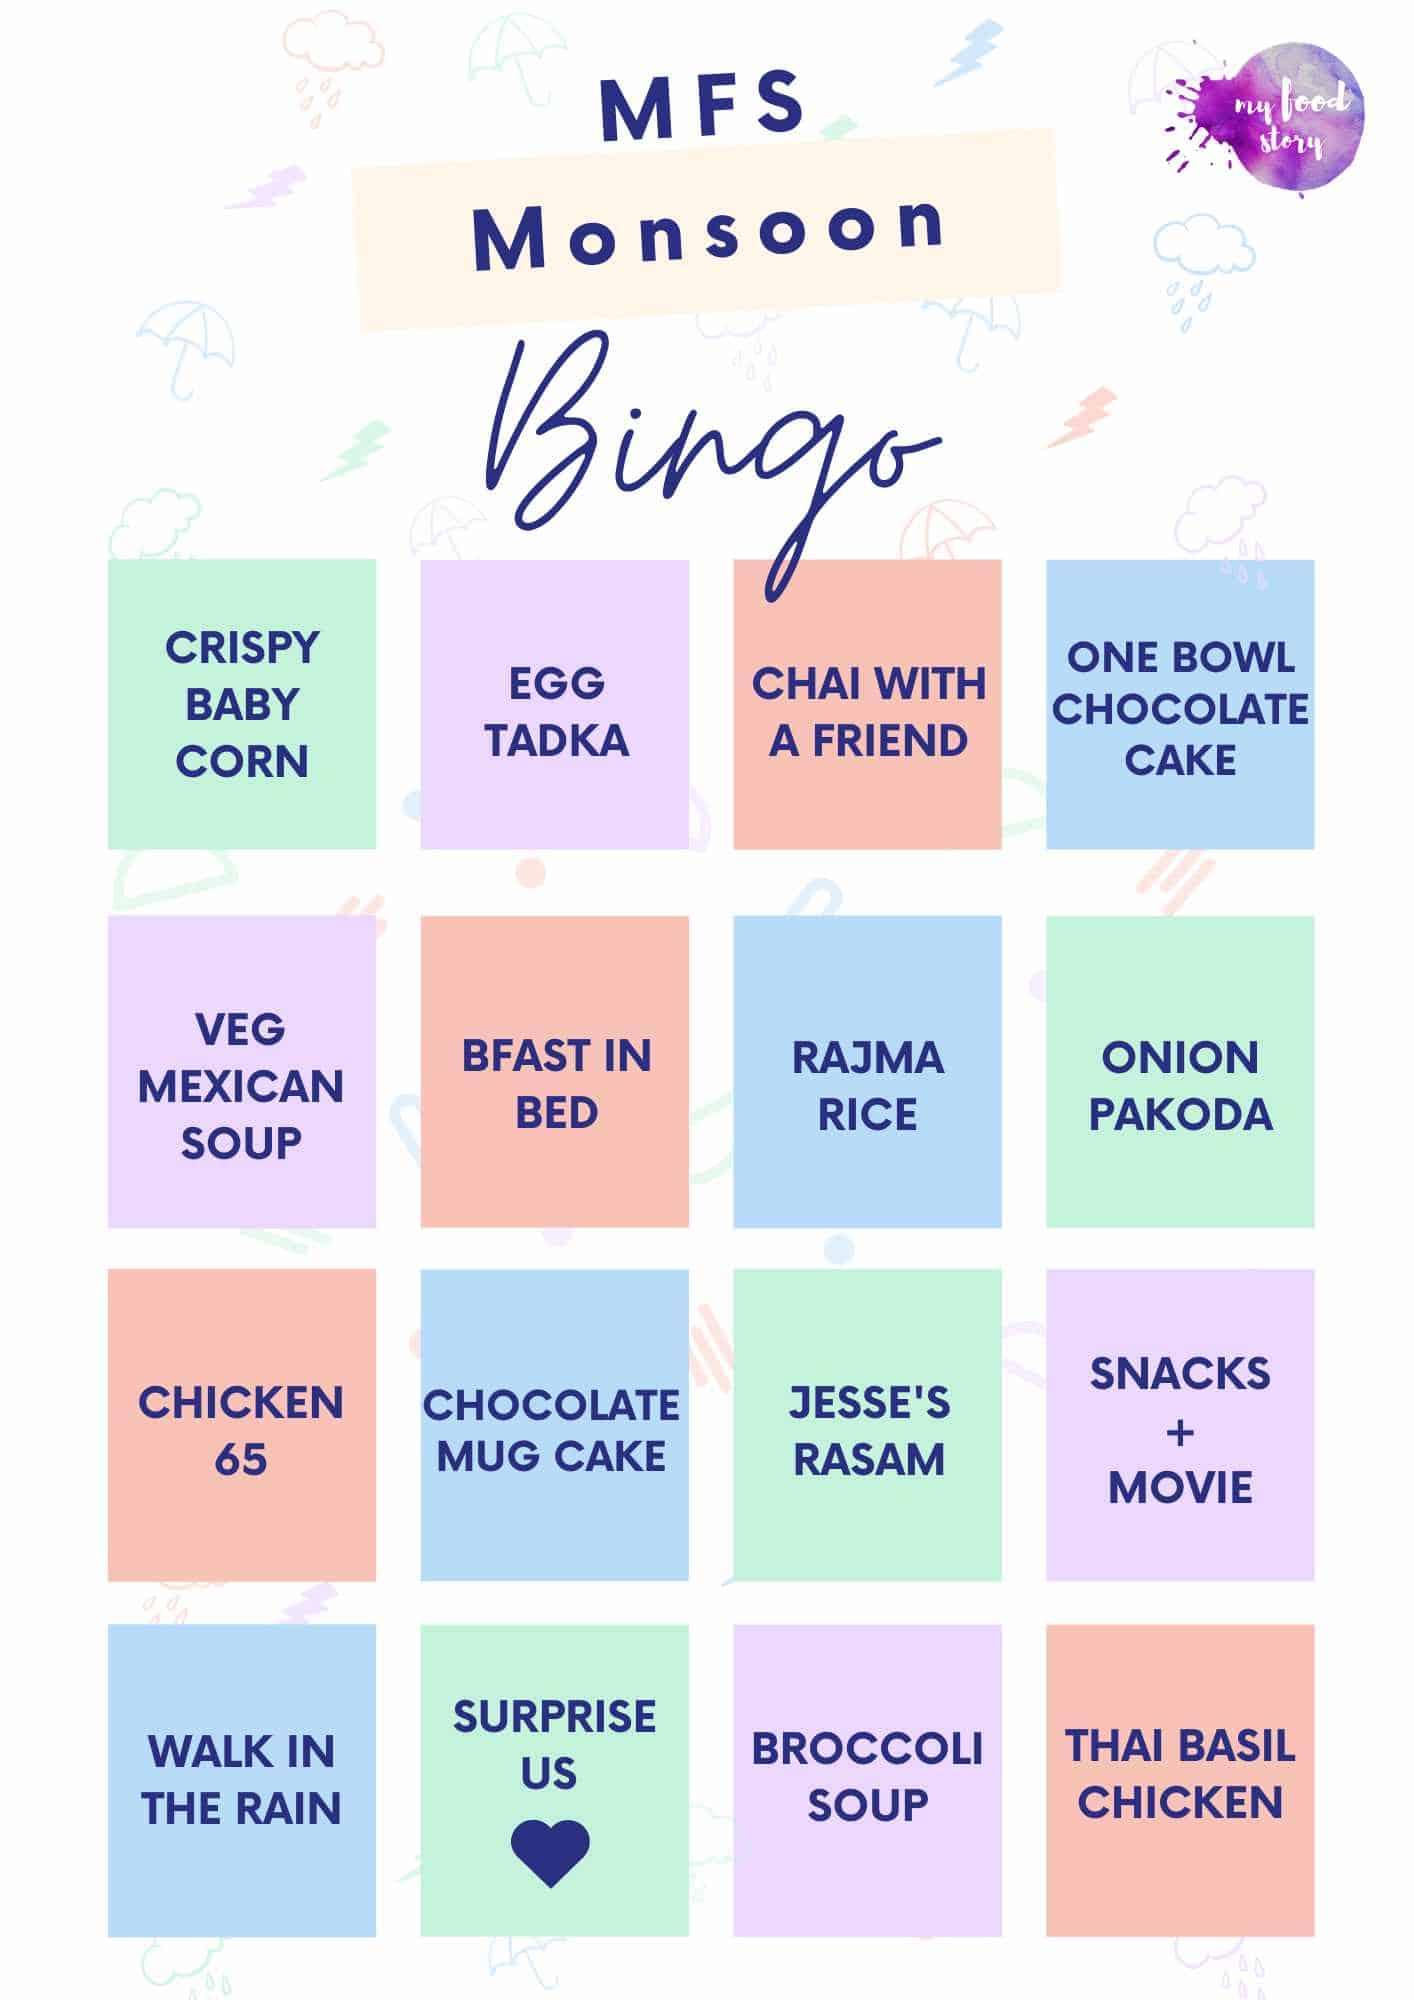  a picture of a bingo card with text written on it